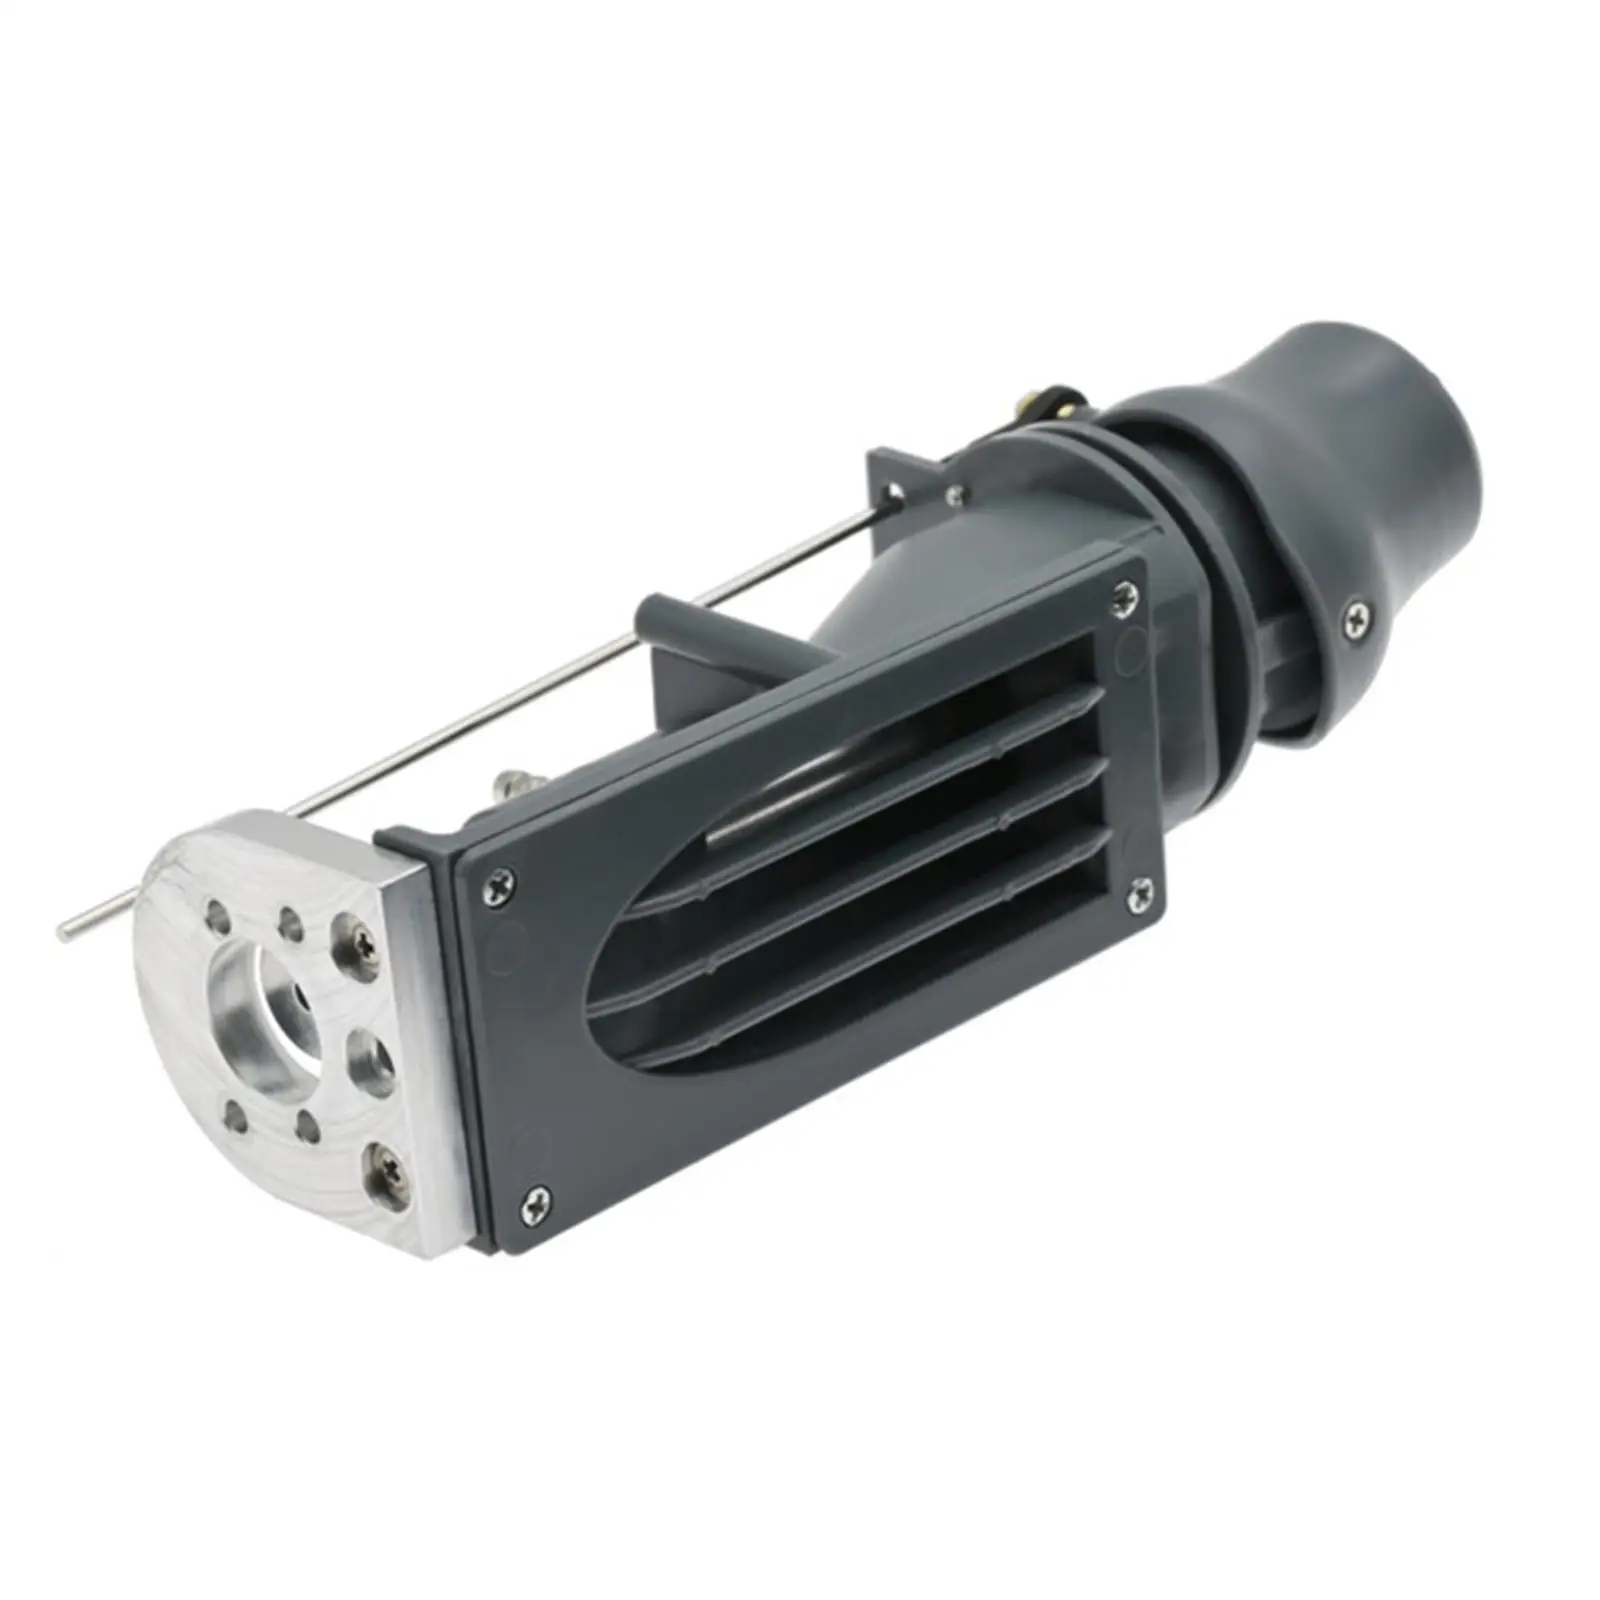 Water Thruster Jet Pump with 540 Brushless Motor 820W 66A for RC Jet Drive Boat Replaces Spare Parts Accessory Upgrade